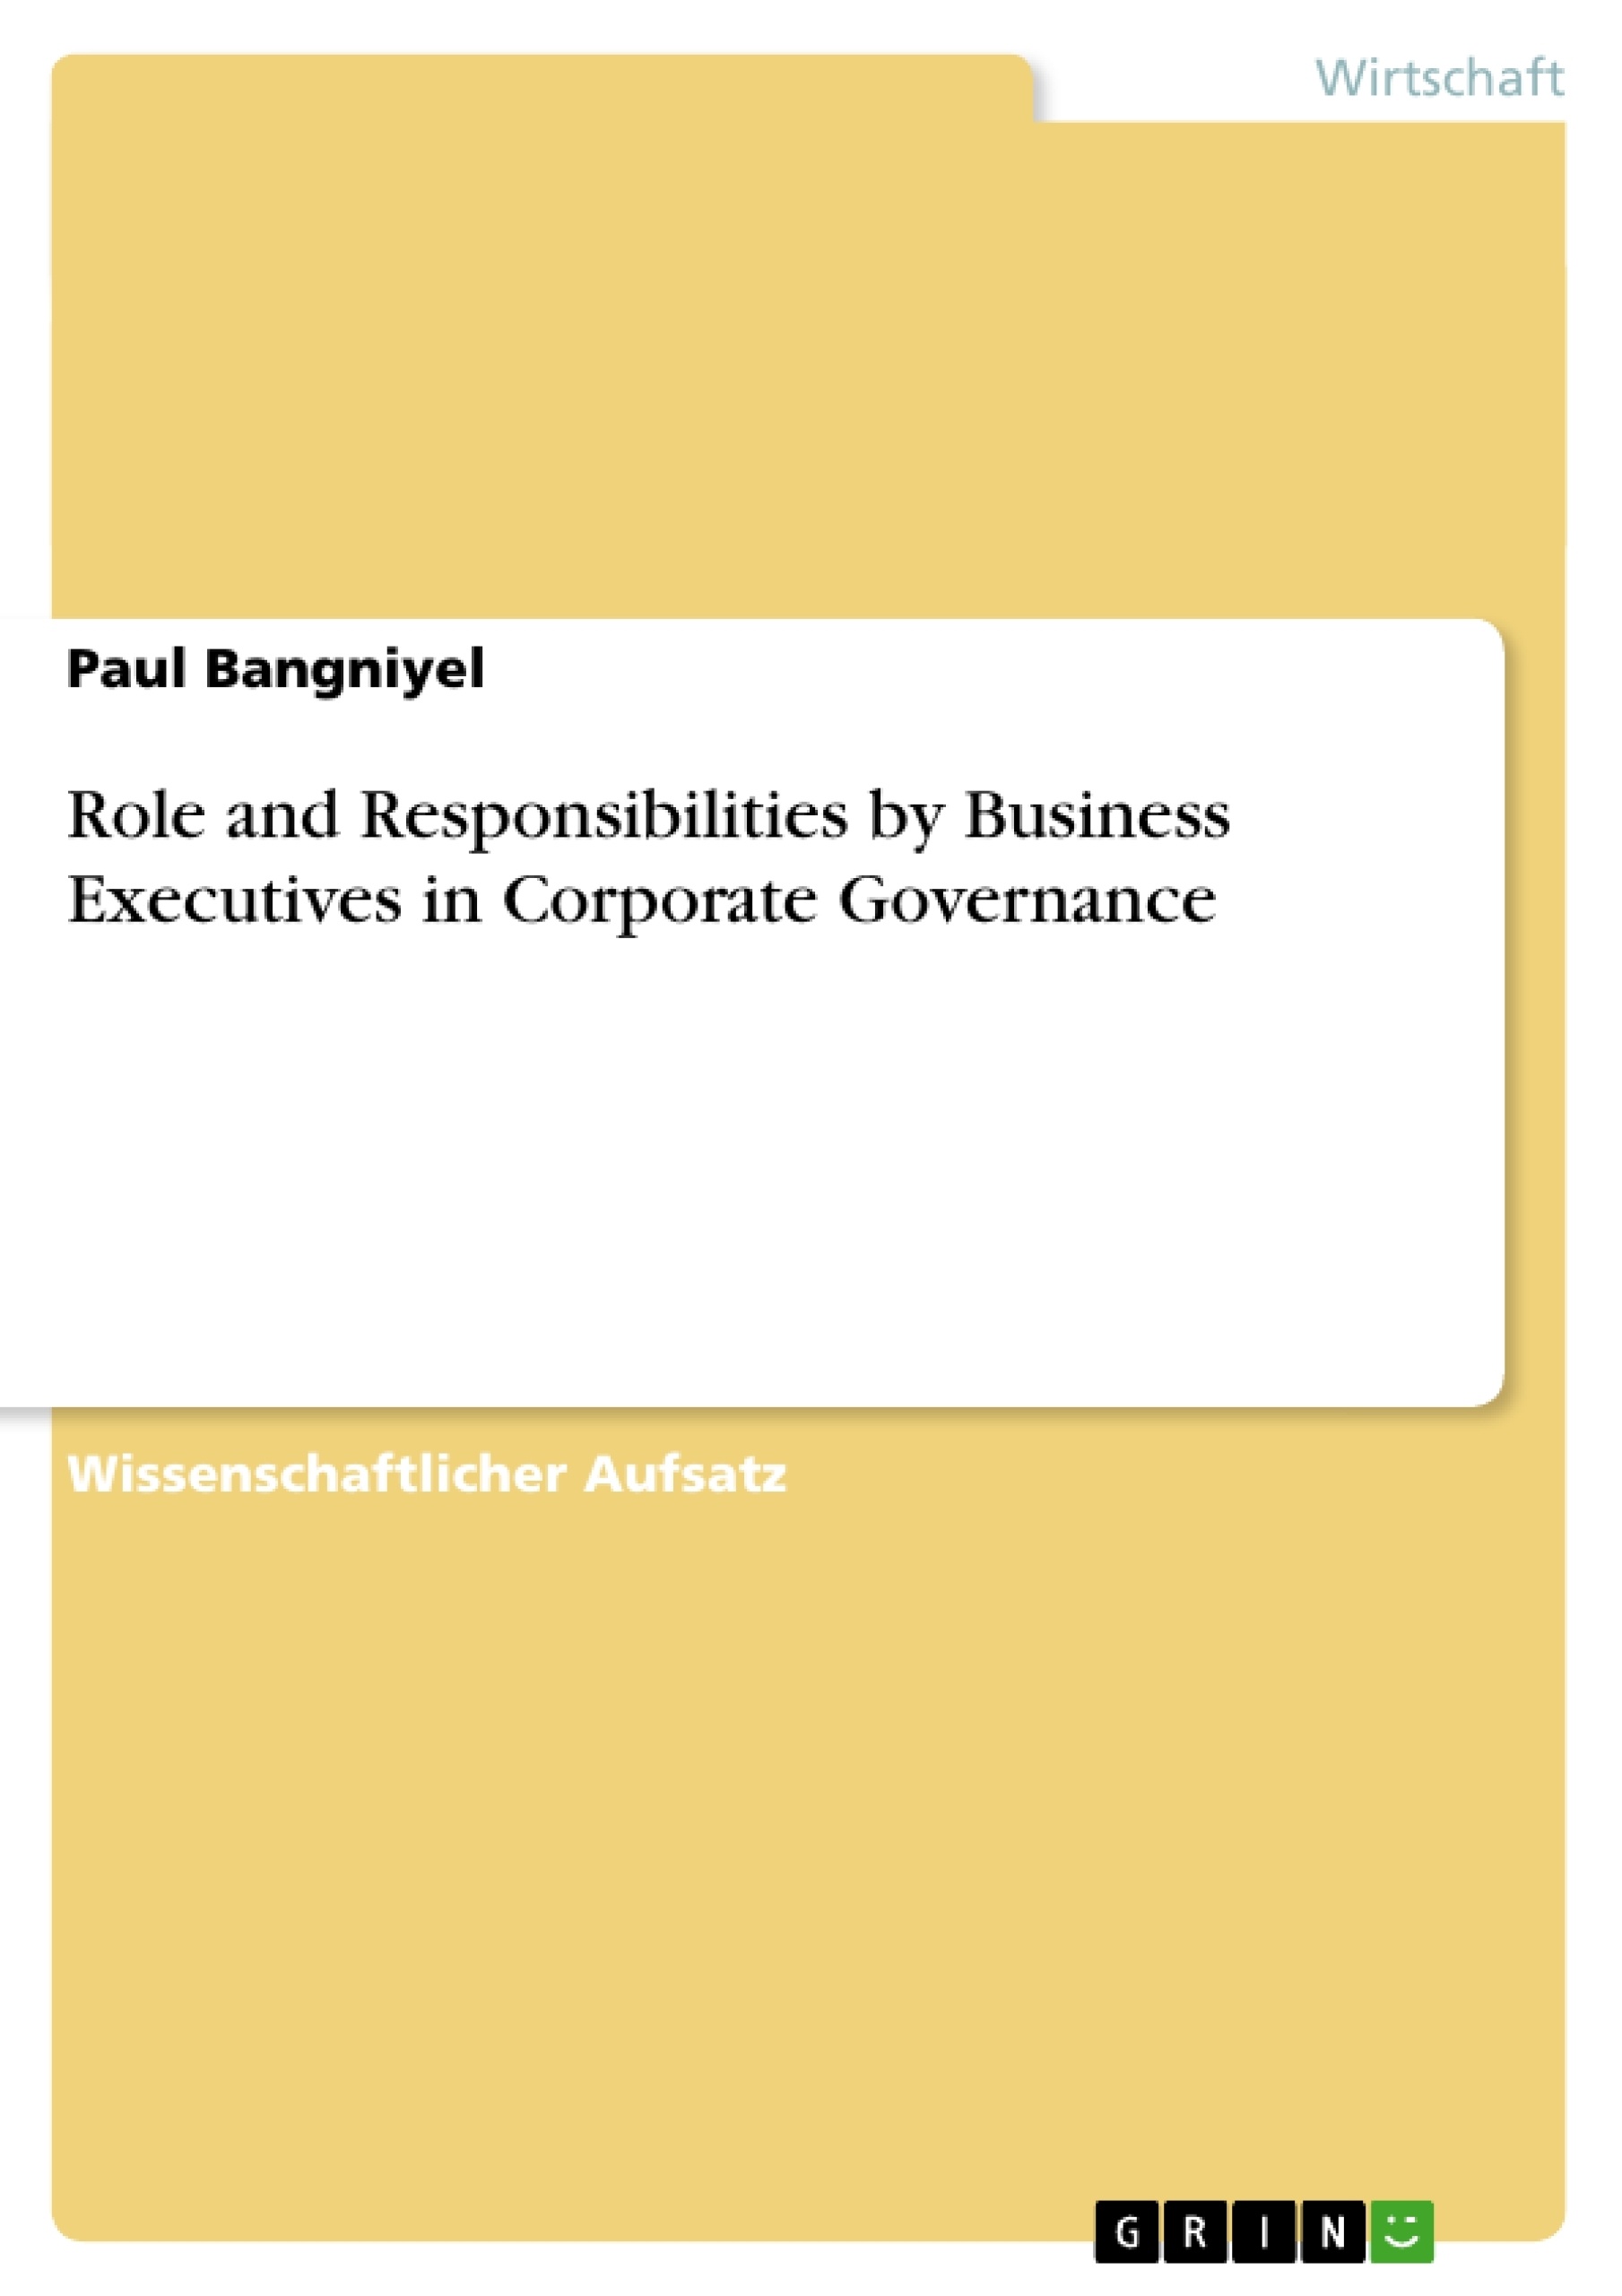 Title: Role and Responsibilities by Business Executives in Corporate Governance